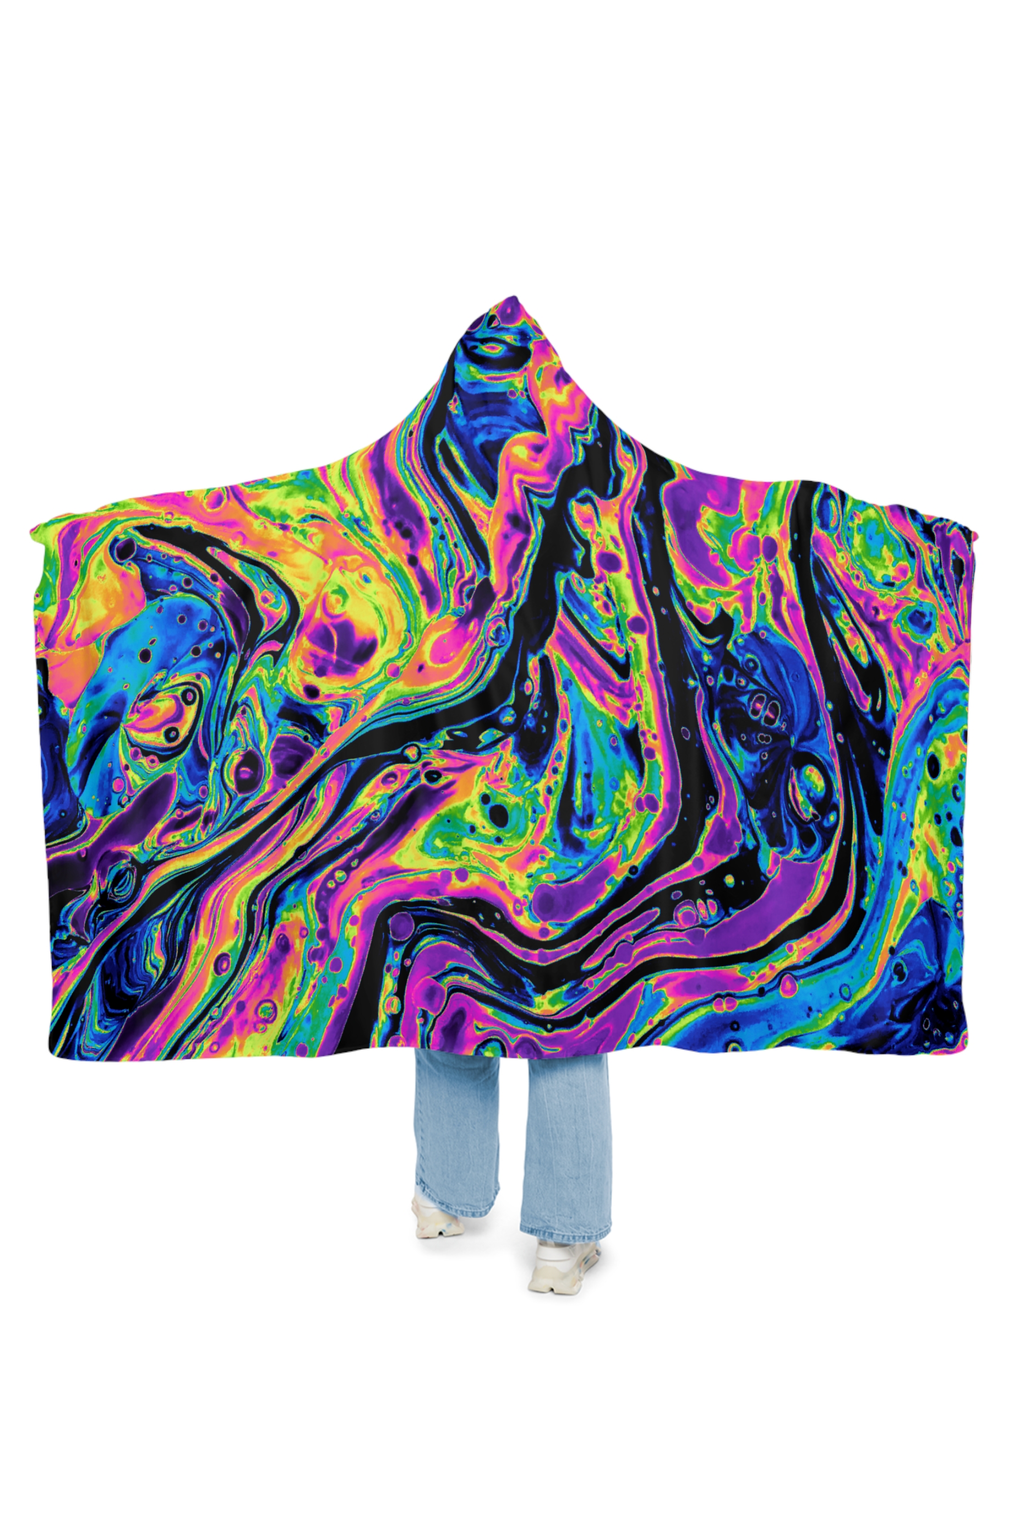 Acid Attack Hooded Blanket (Made to Order) - Liquid Mirage